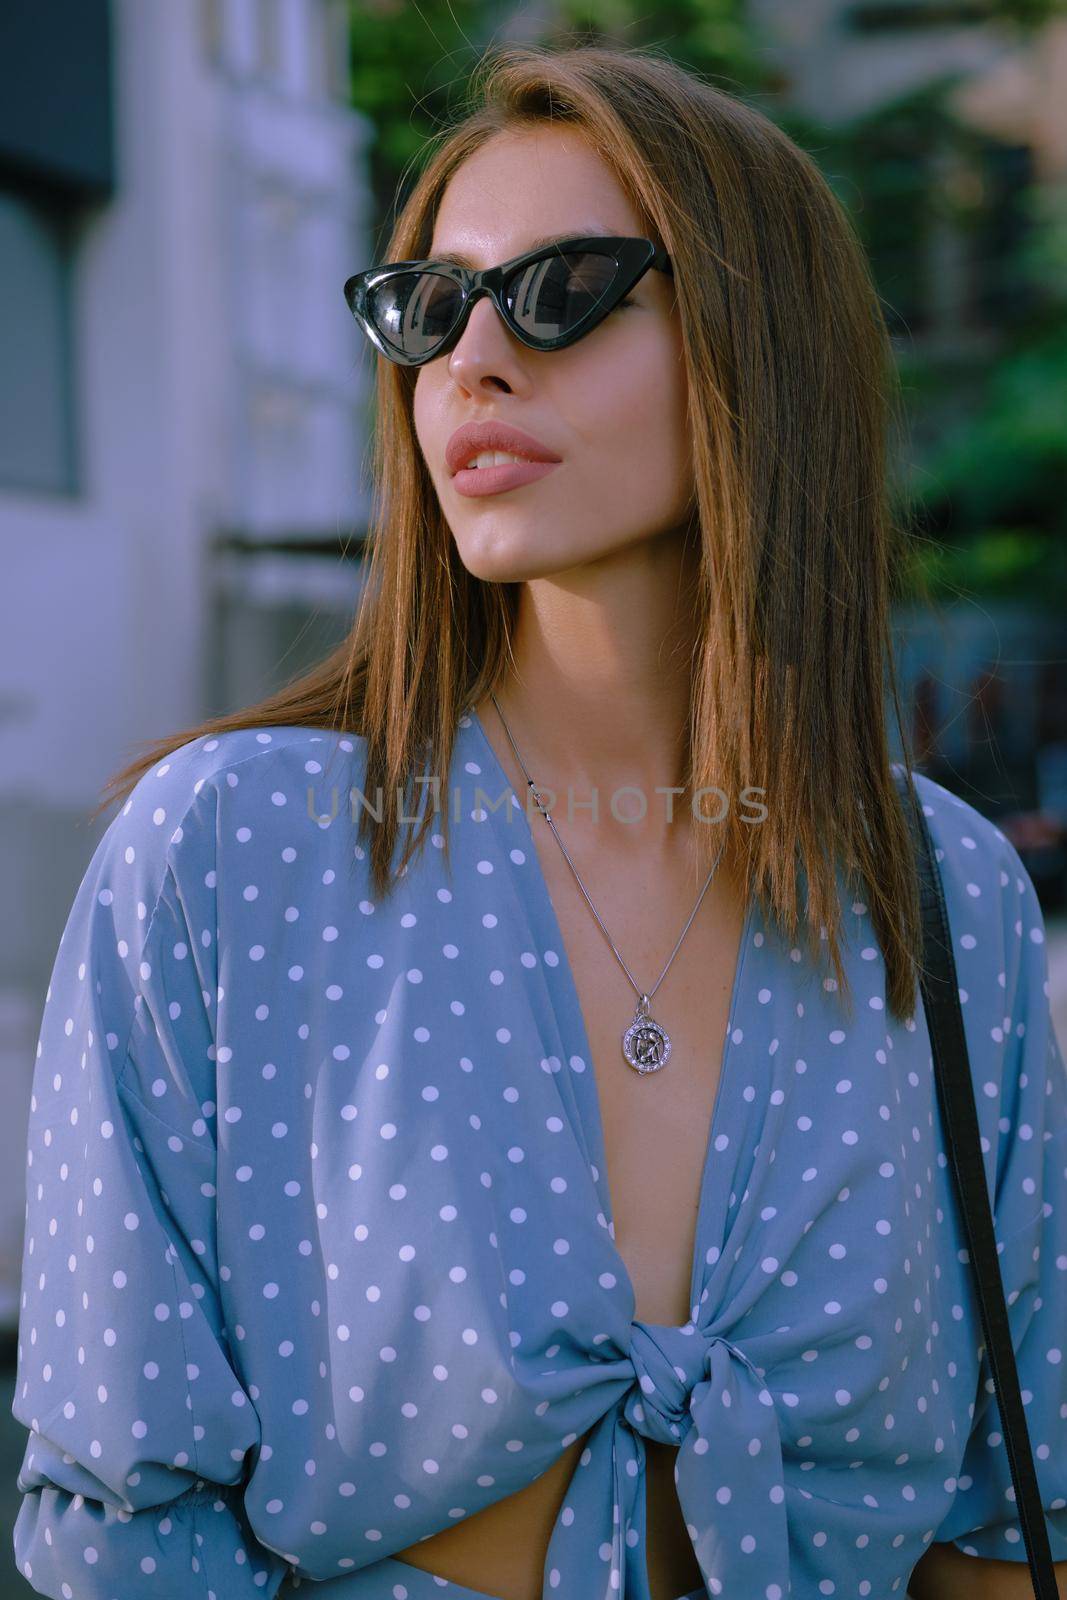 Blonde girl in long blue dress, sunglasses and a small black handbag on her shoulder is walking alone in the city. Fashion and style. Close-up shot. by nazarovsergey